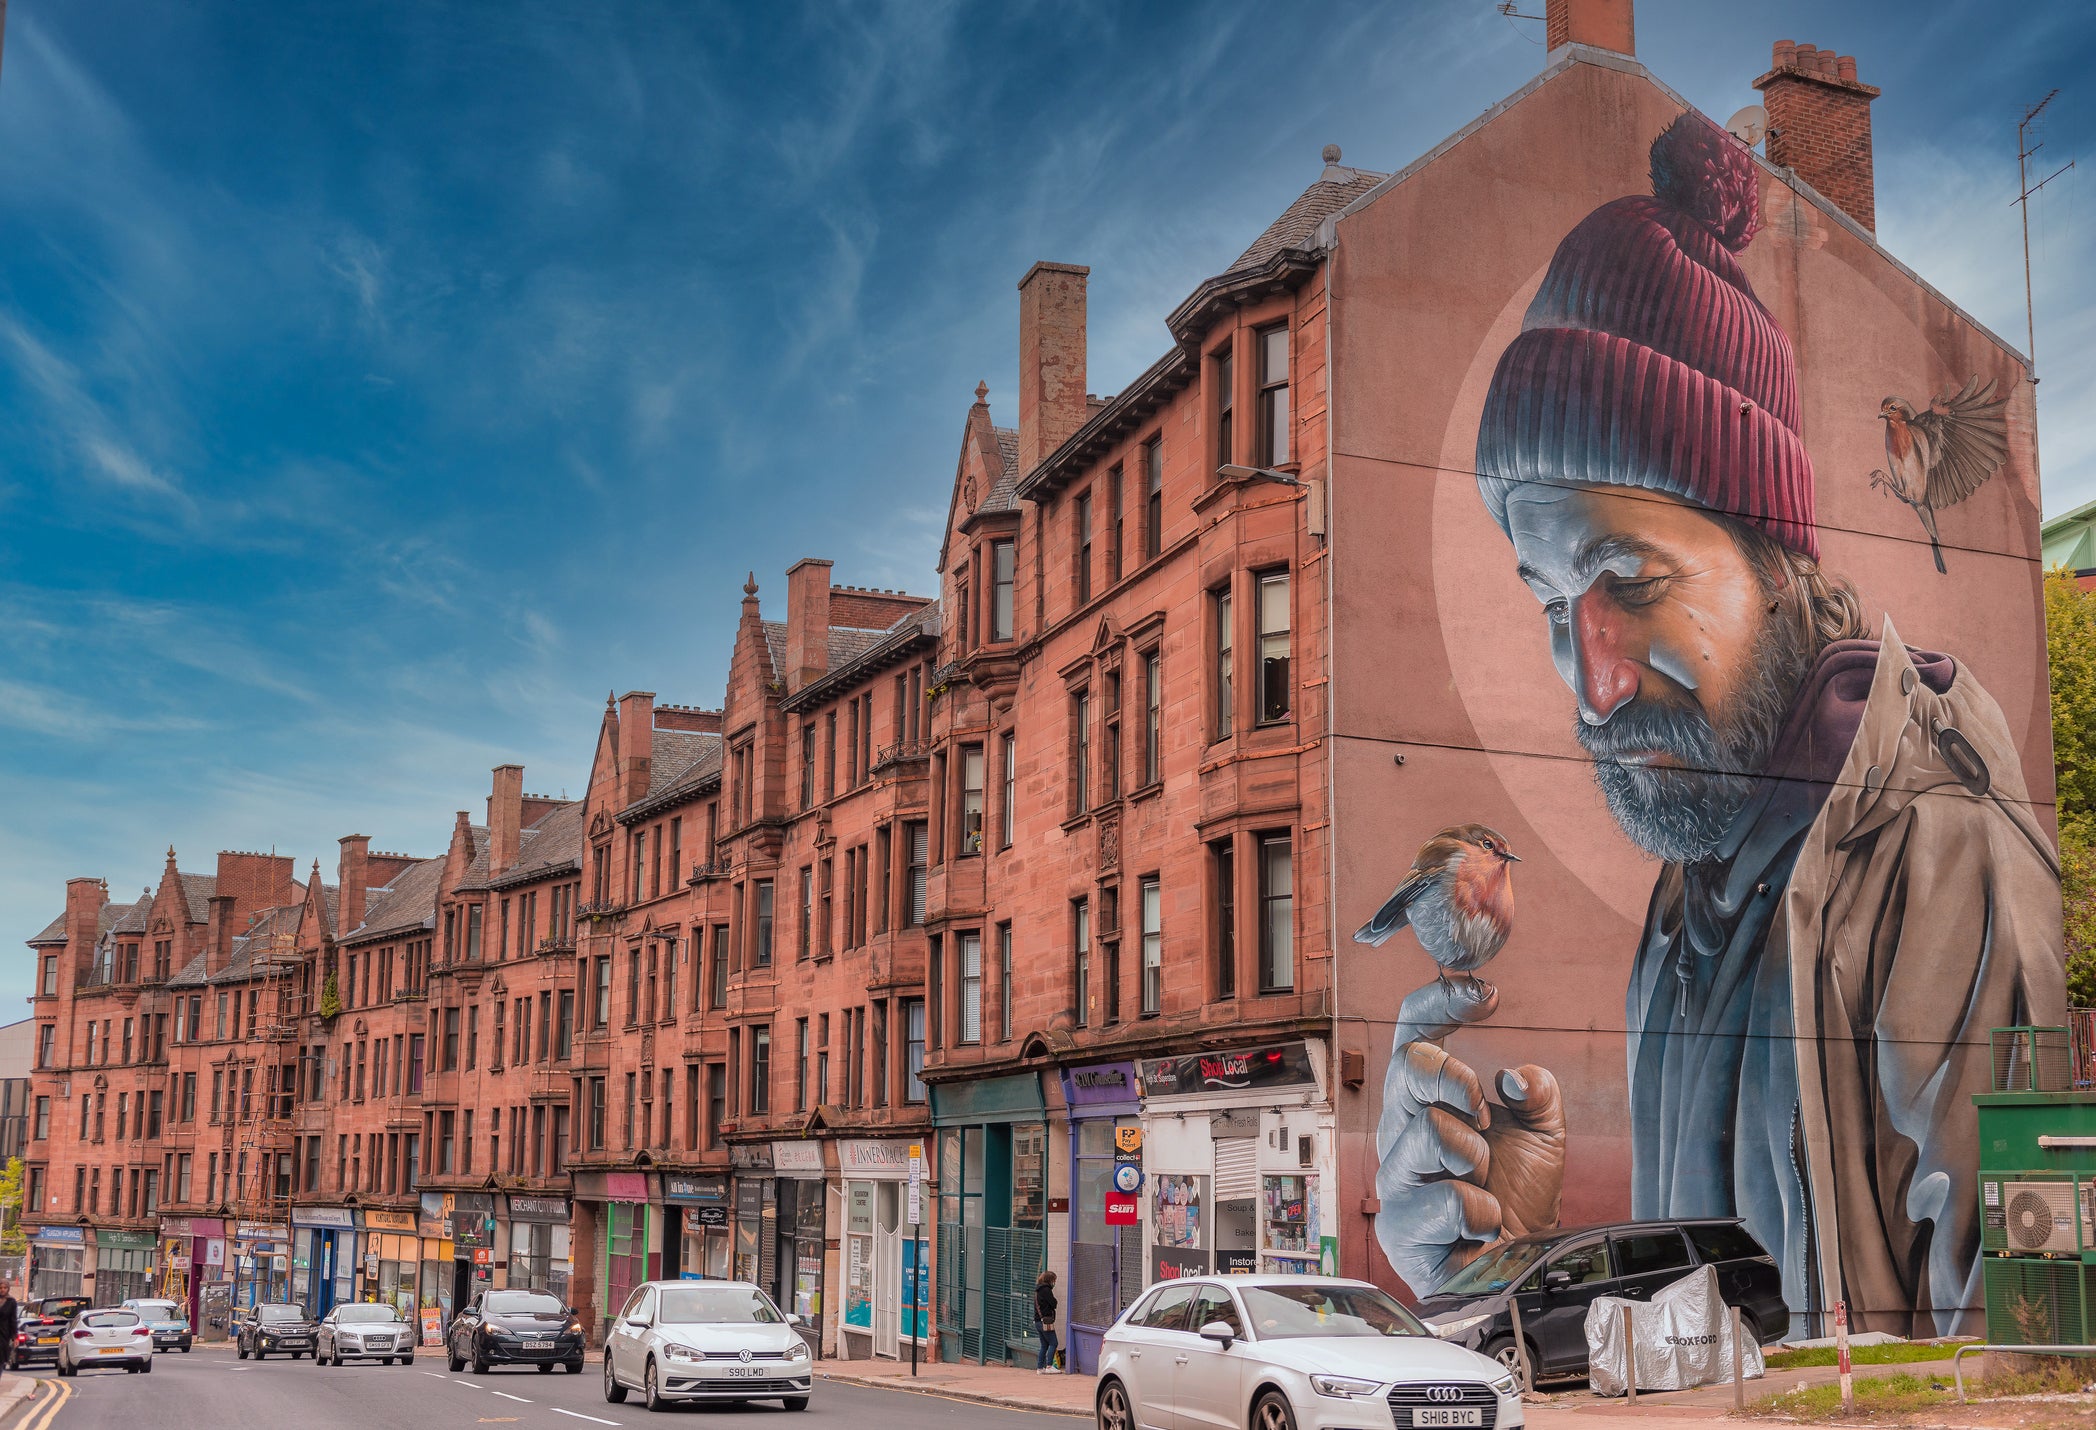 The St Mungo mural in Glasgow